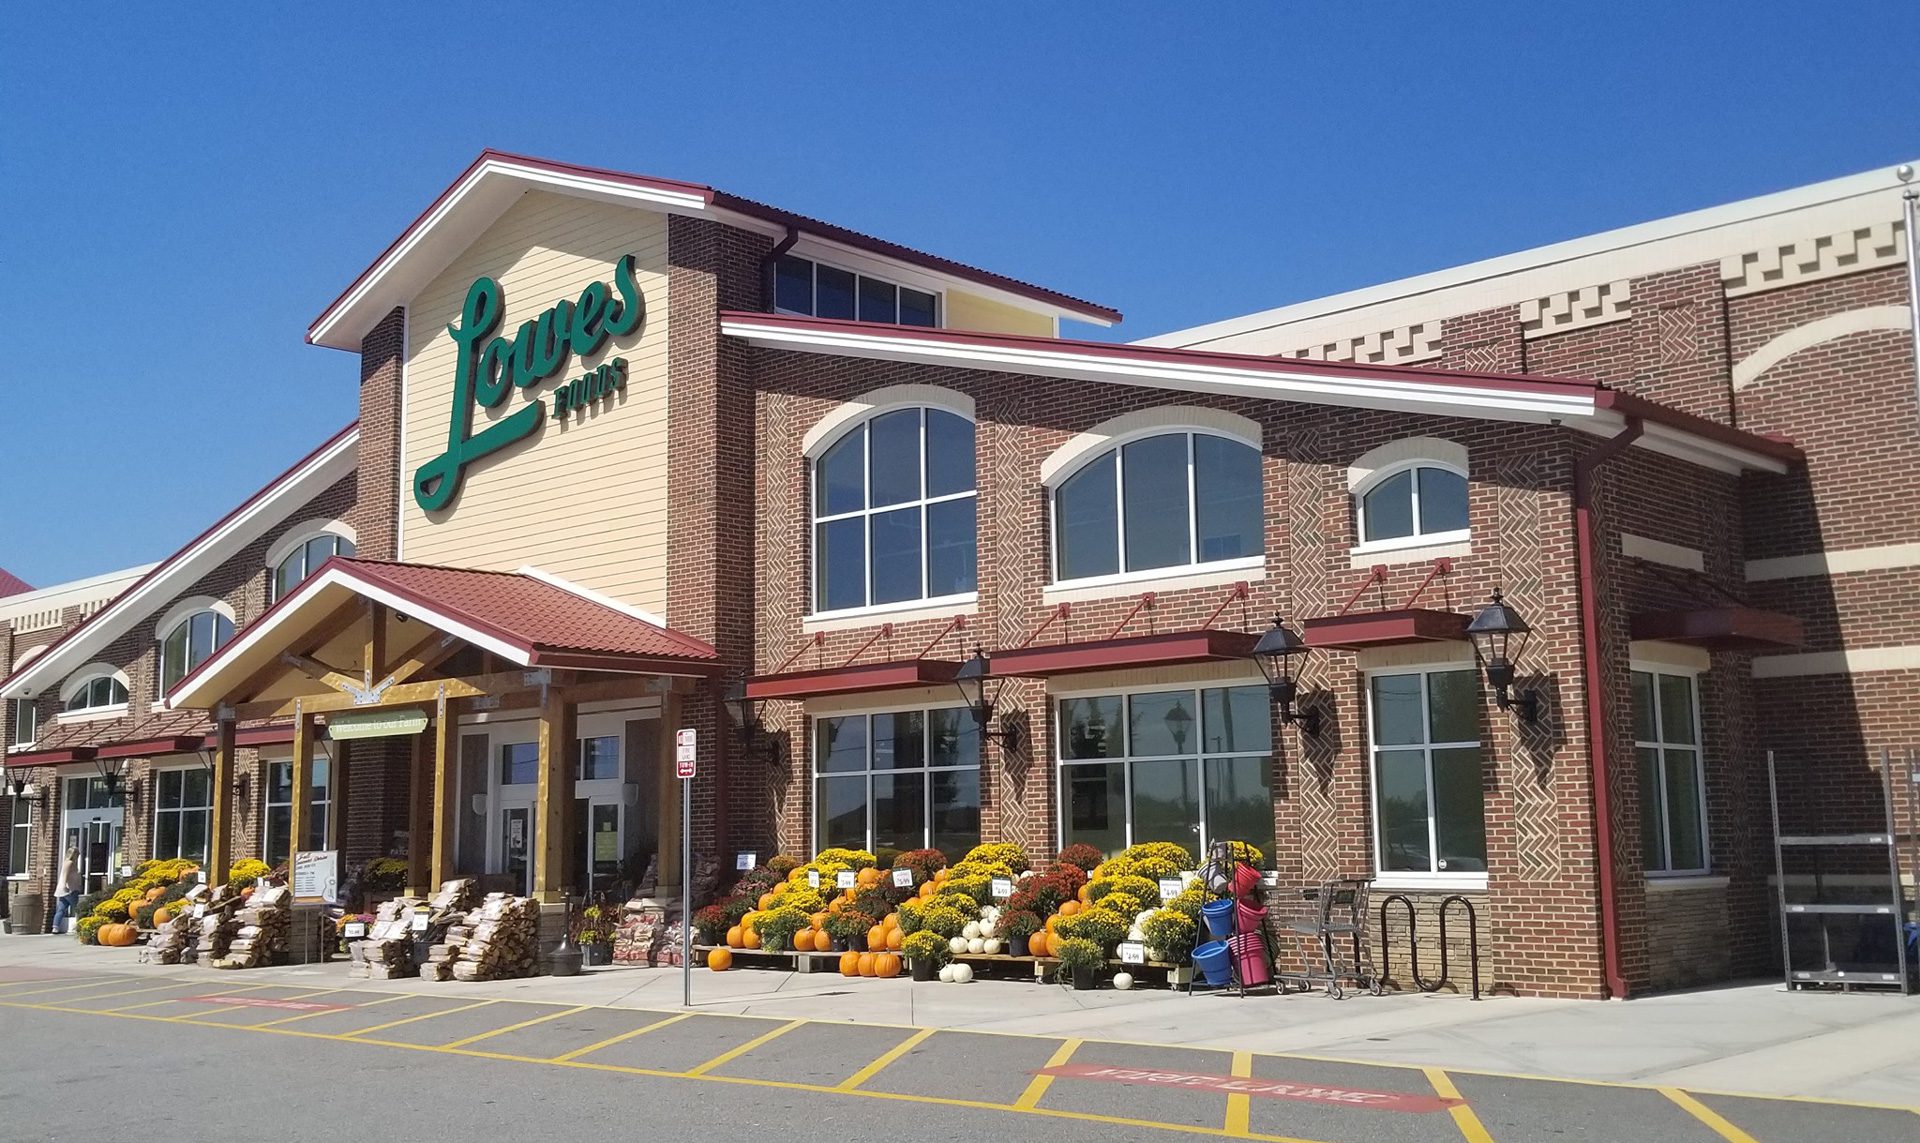 Lowes Foods Kernersville exterior brick with siding on a sunny day